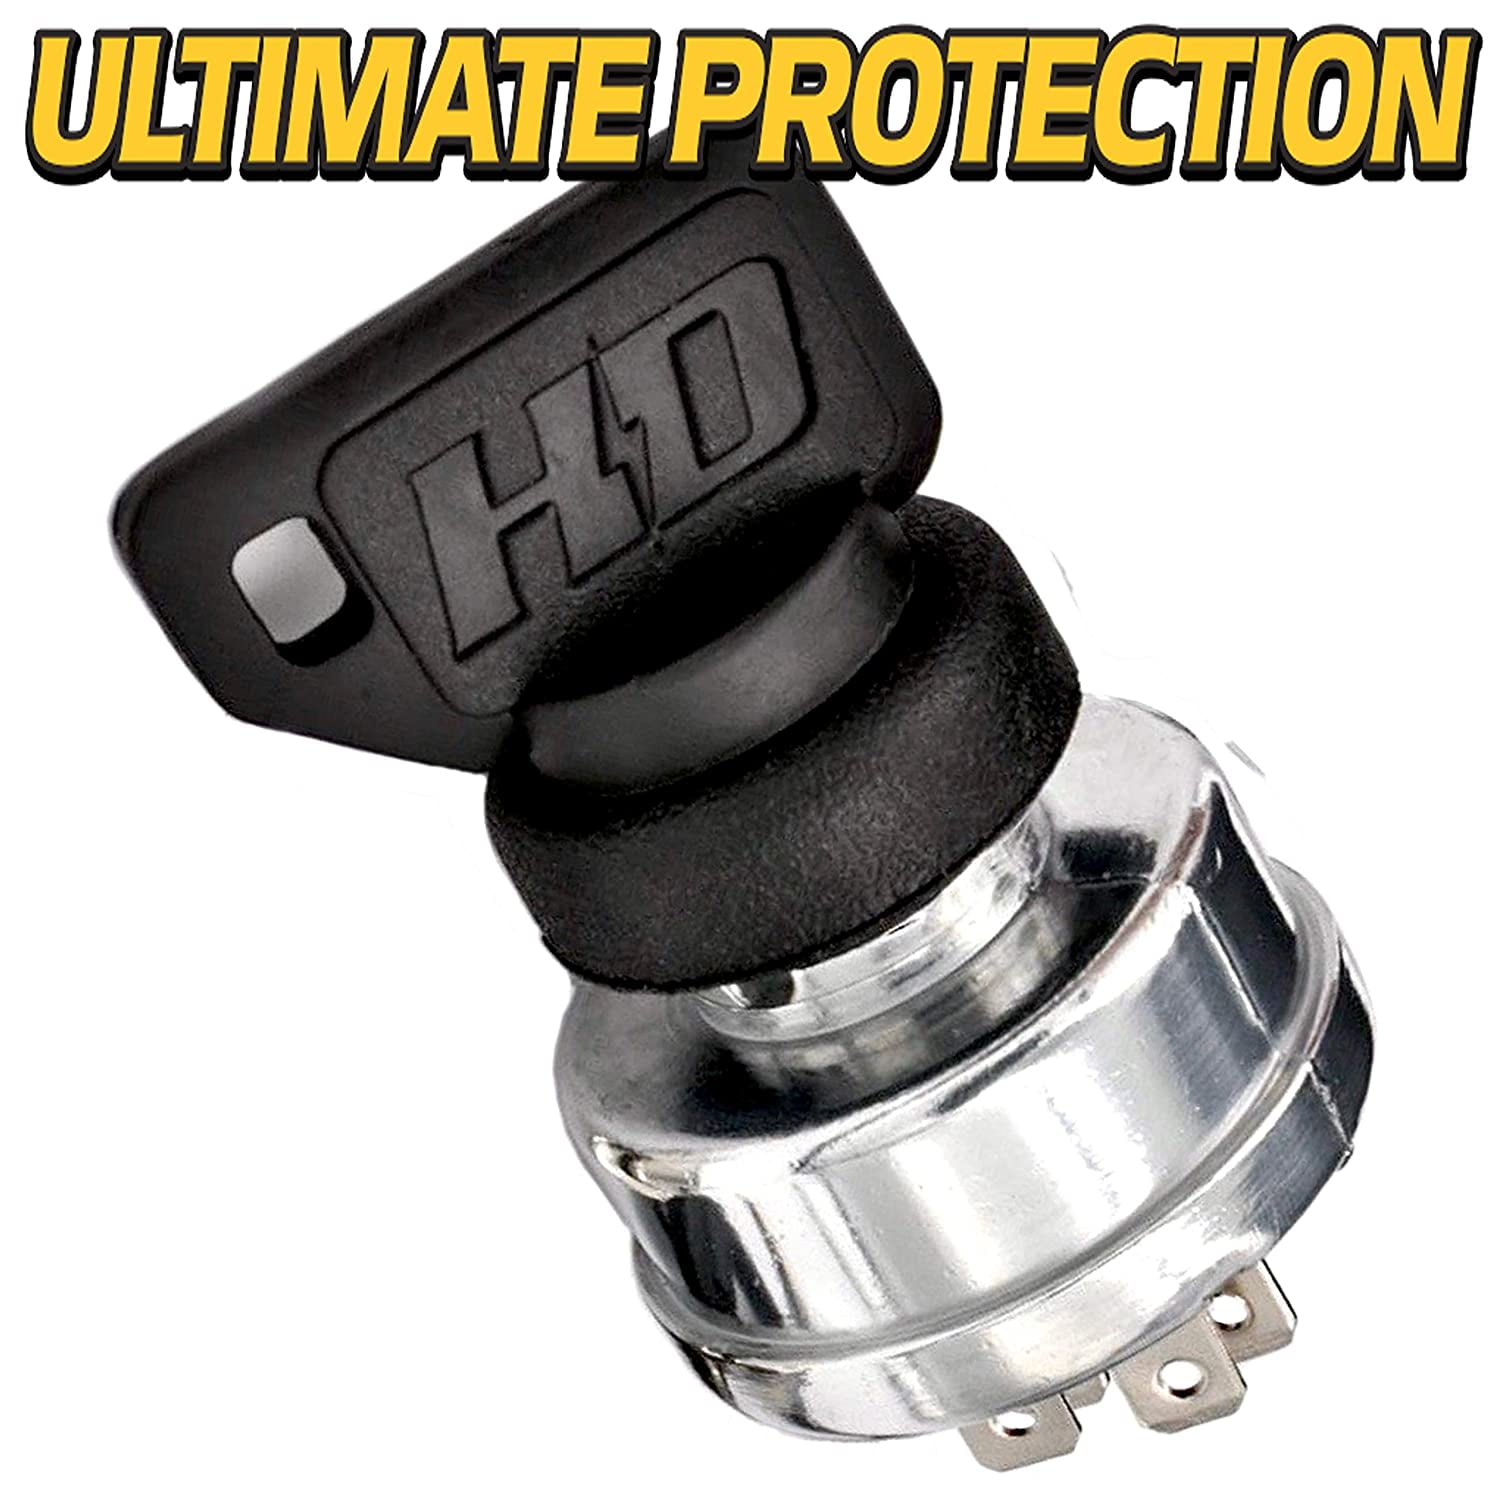 HD Switch Starter Ignition Key Switch for John Deere TCA51267, TCU51054, TCU51053  Fits M653 M655 M665 Ultimate Dual Dust Protection System Upgrade w/  Keys  Free Carabiner